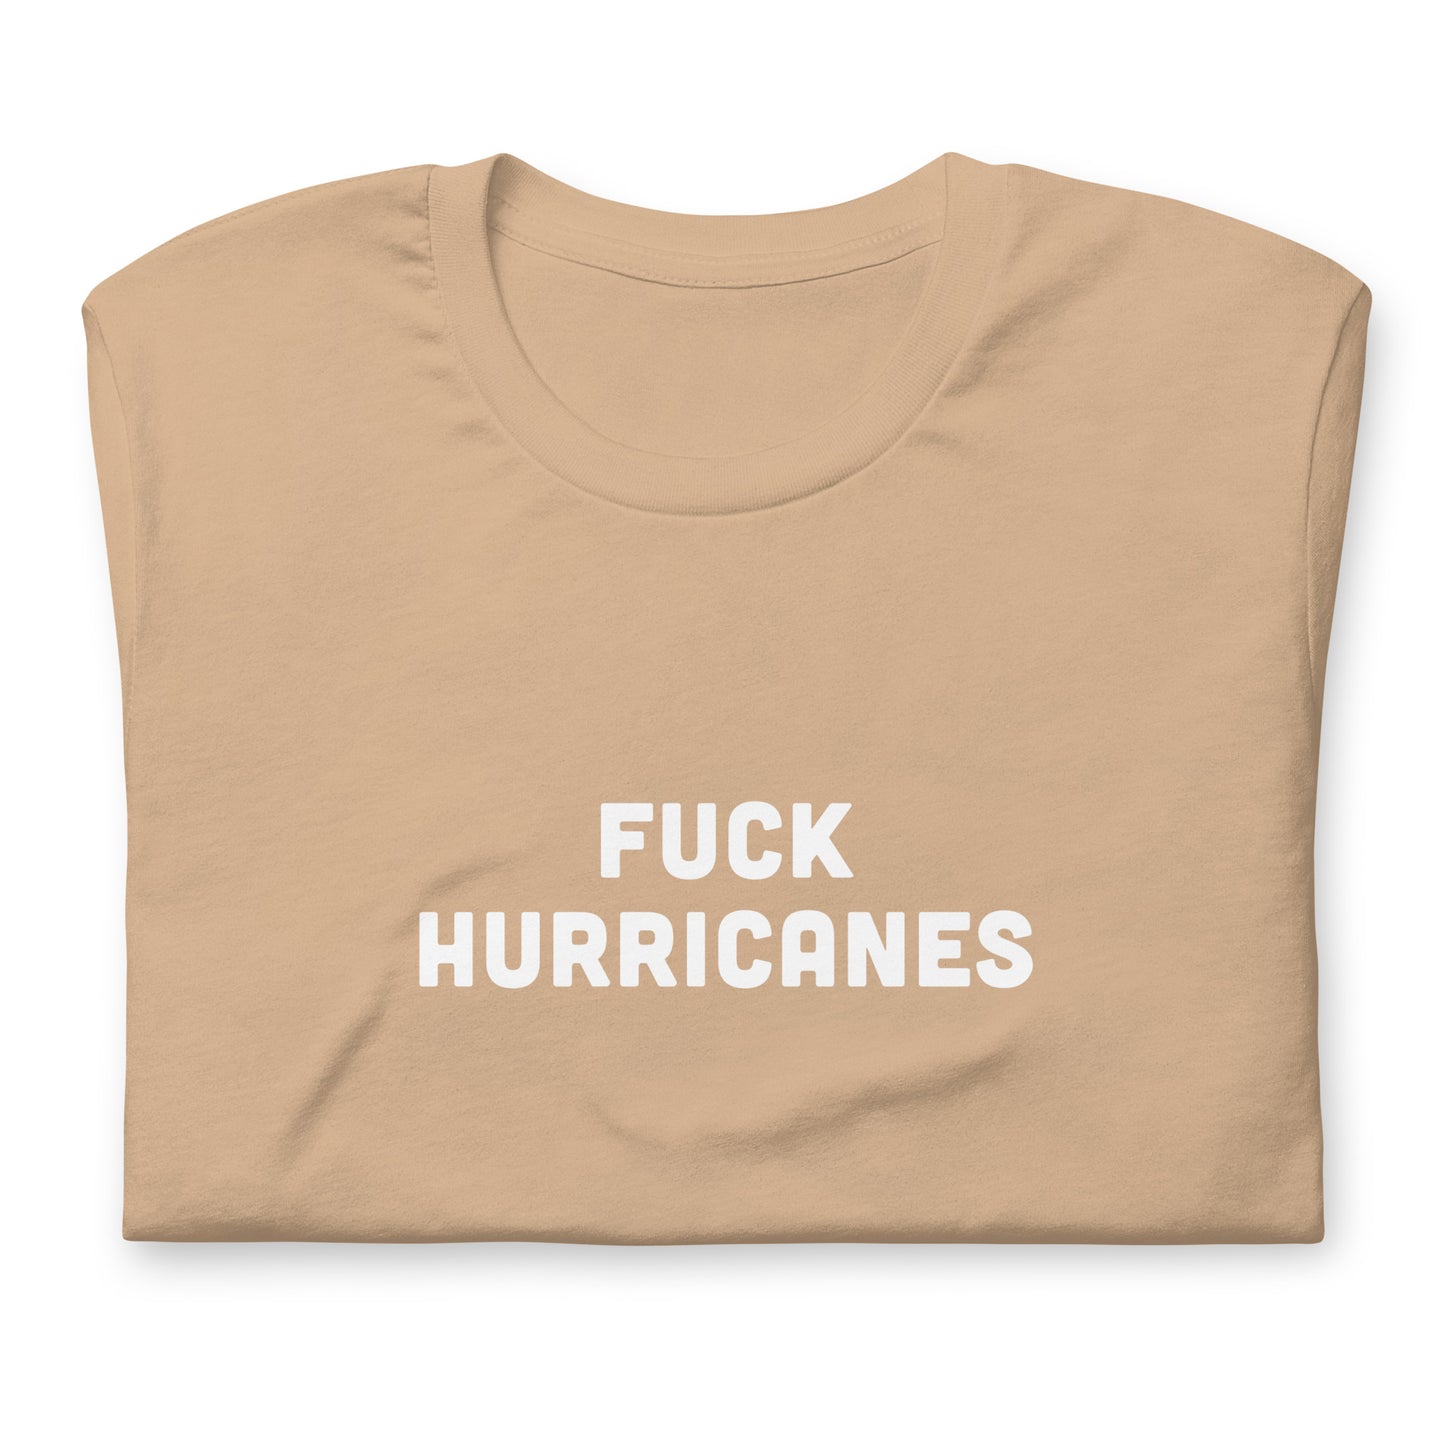 Fuck Hurricanes T-Shirt Size XL Color Forest